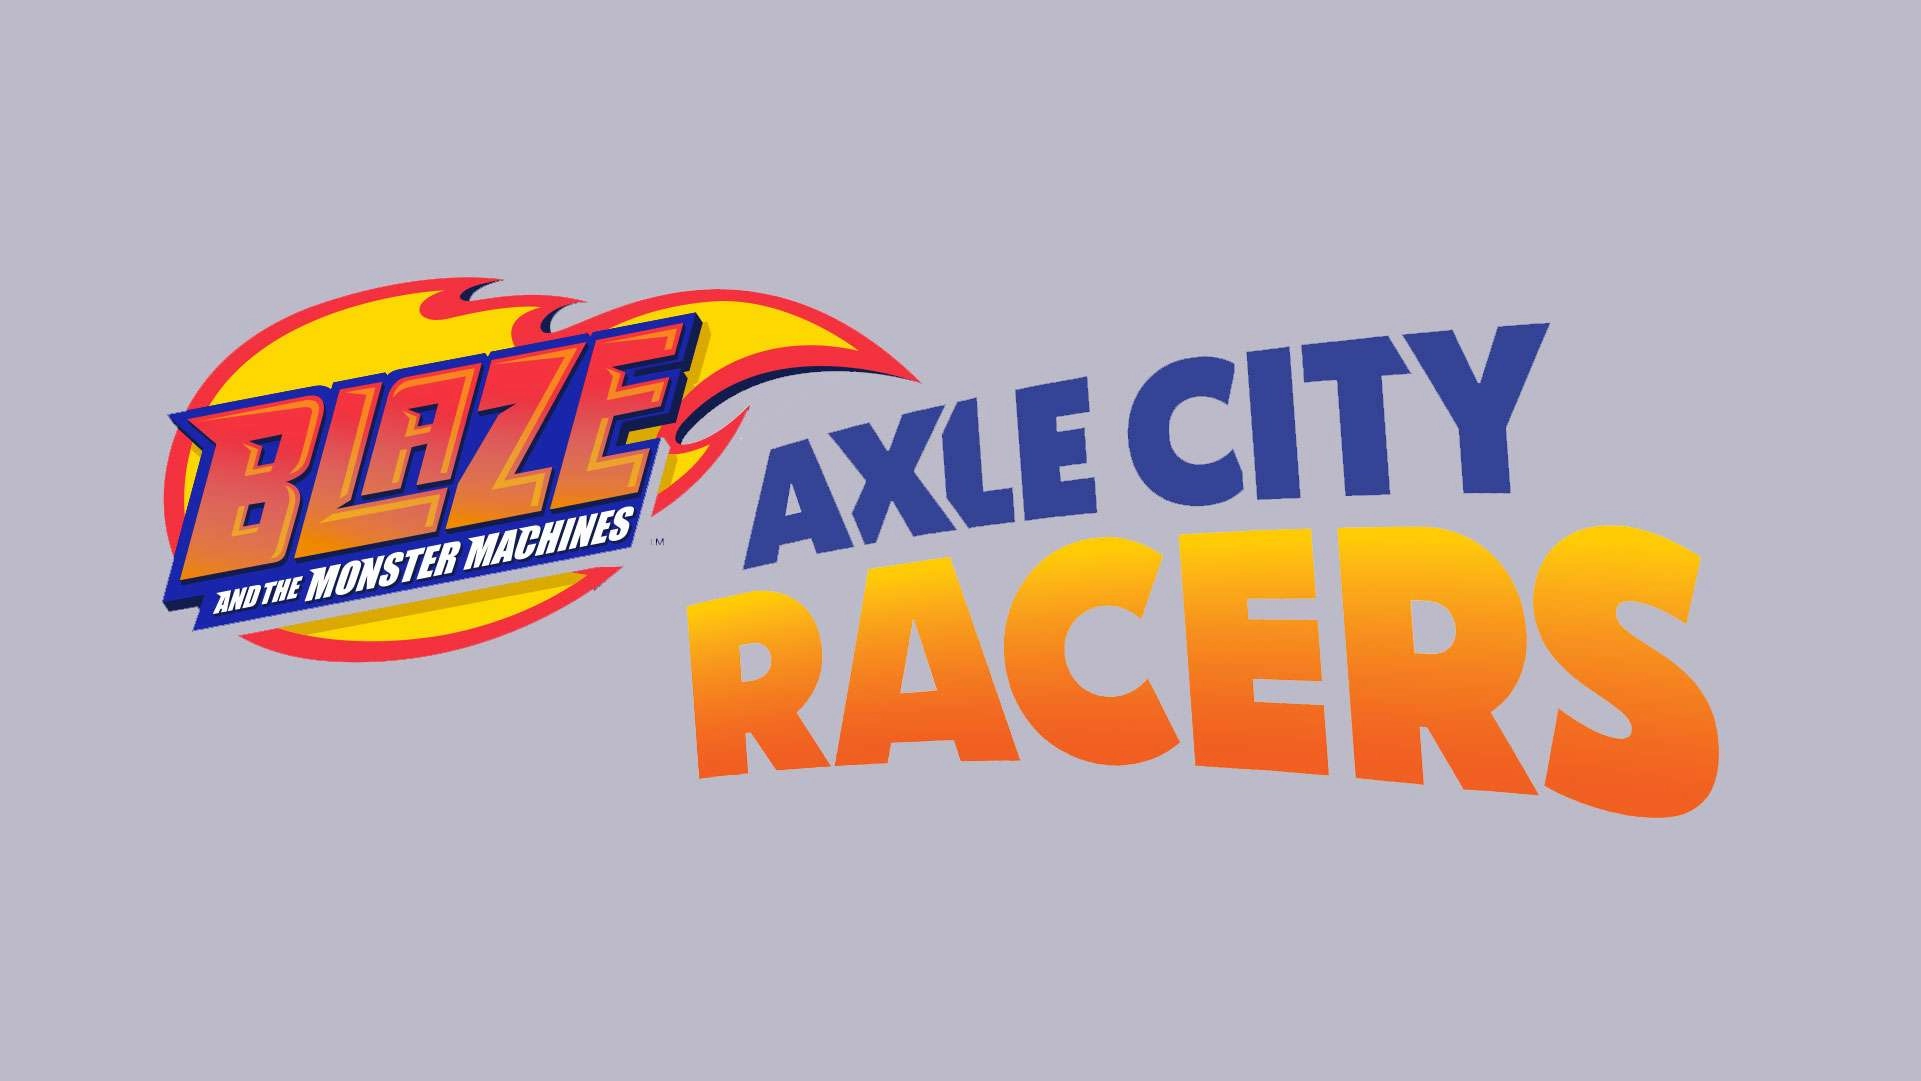 Blaze and the Monster Machines Axle City Racers announced for PC and